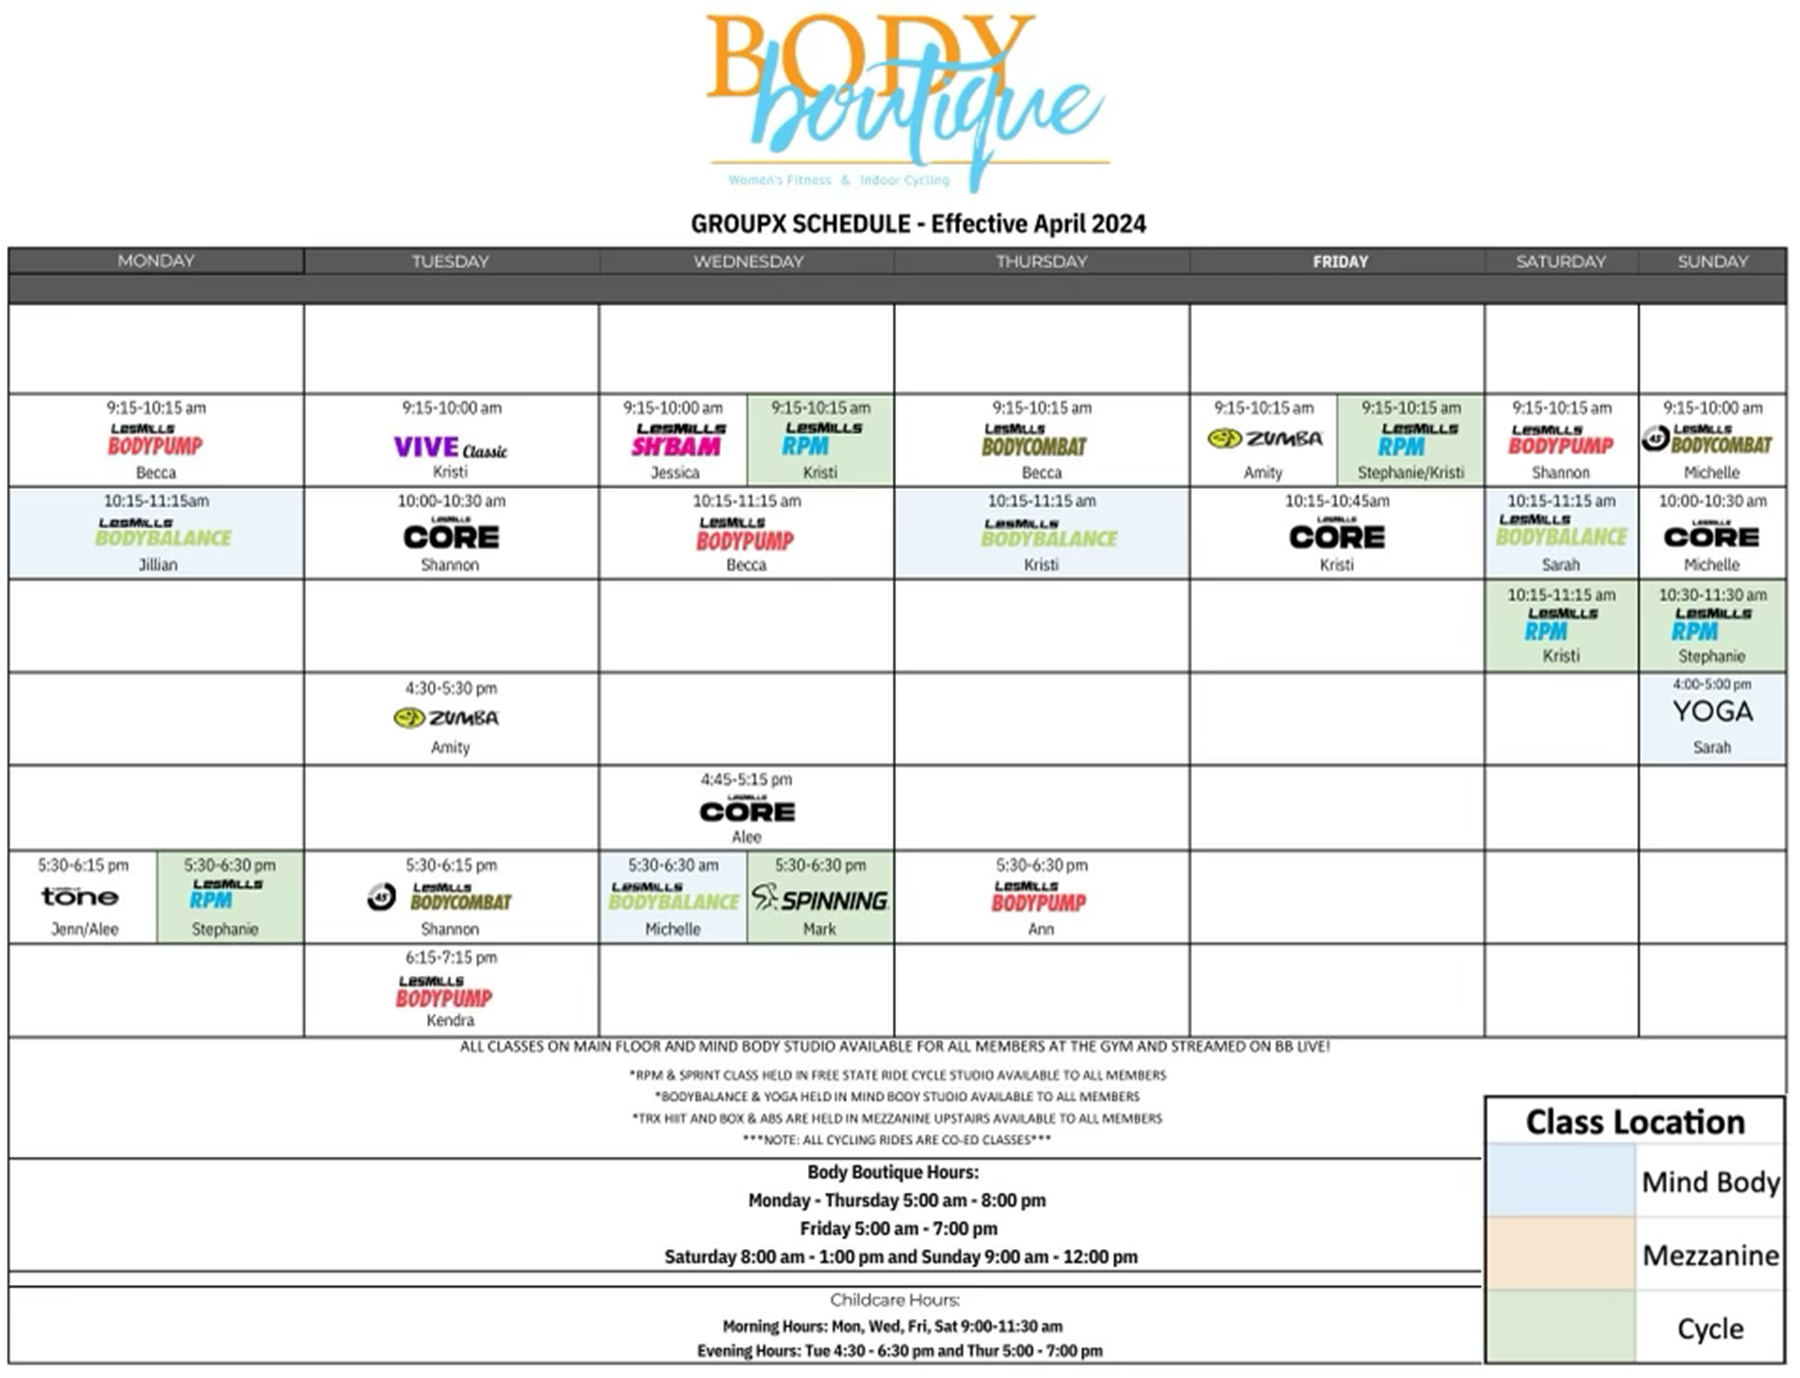 Body Boutique Fitness GroupX Class Schedule